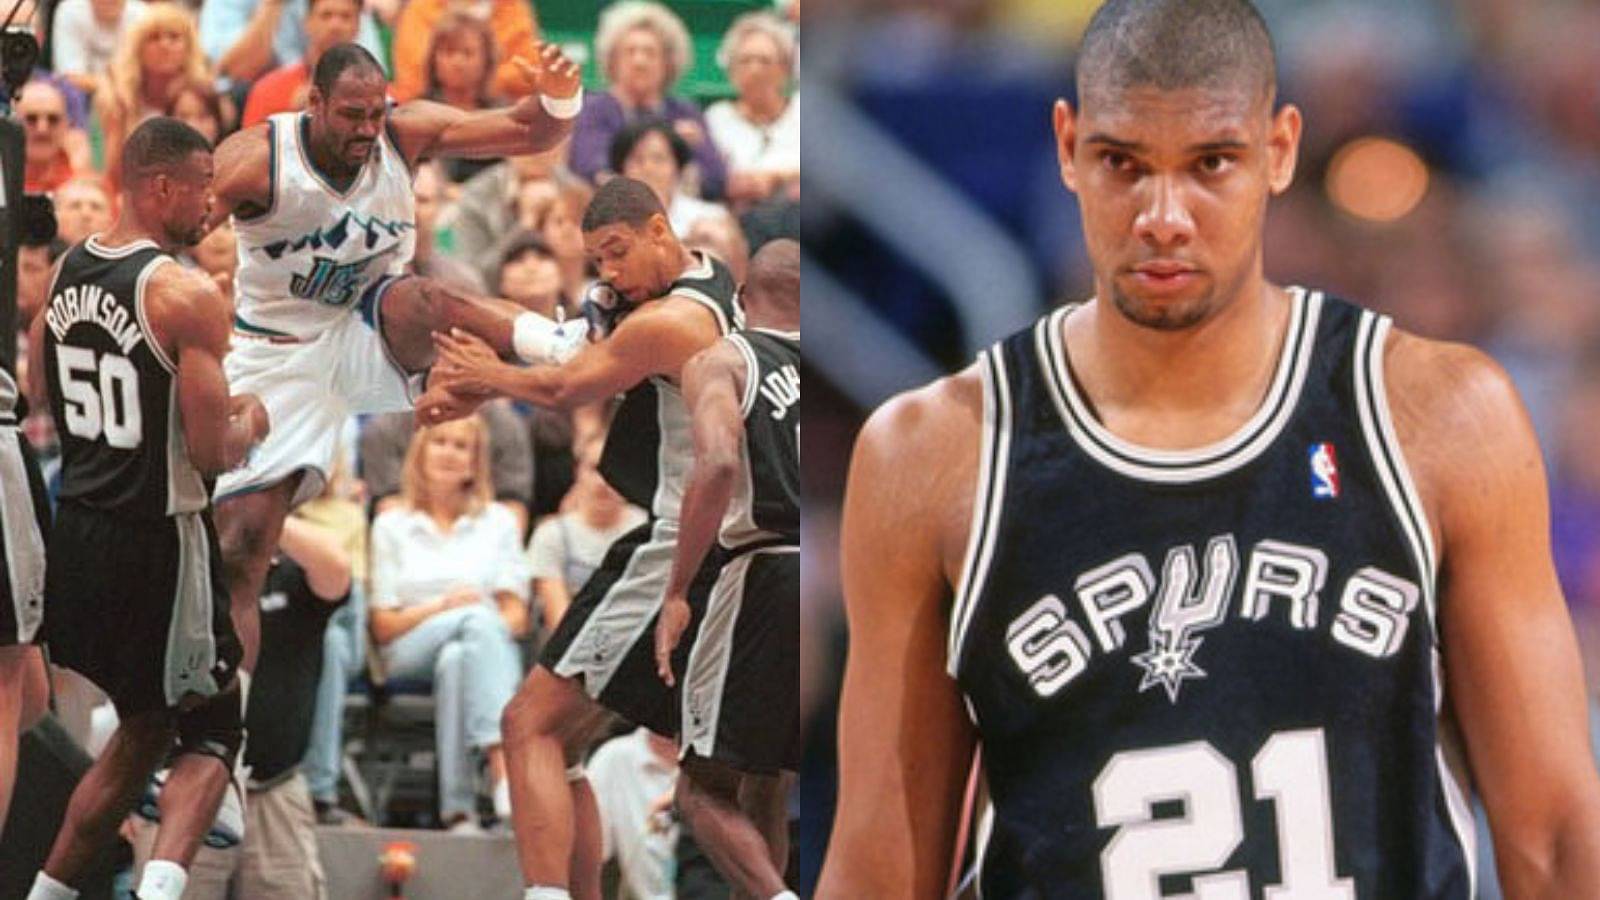 6ft 11” rookie Tim Duncan lived to see another day as 6’9”, 260 lbs Karl Malone kicked him in the face